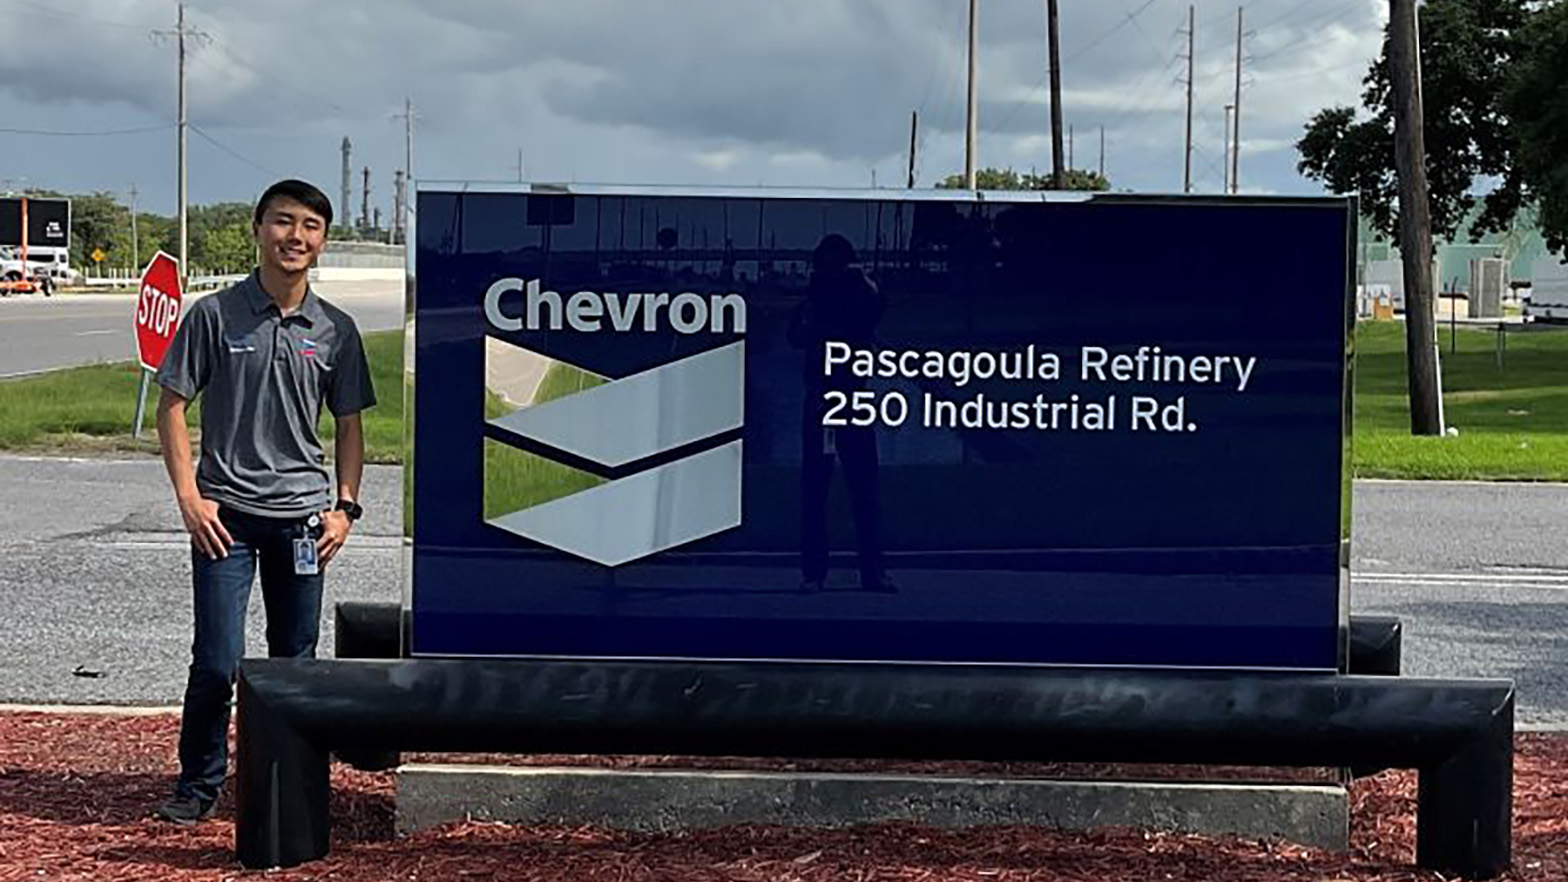 Nicholas Pak interned as a design engineer at the Chevron Pascagoula Refinery during Summer 2022